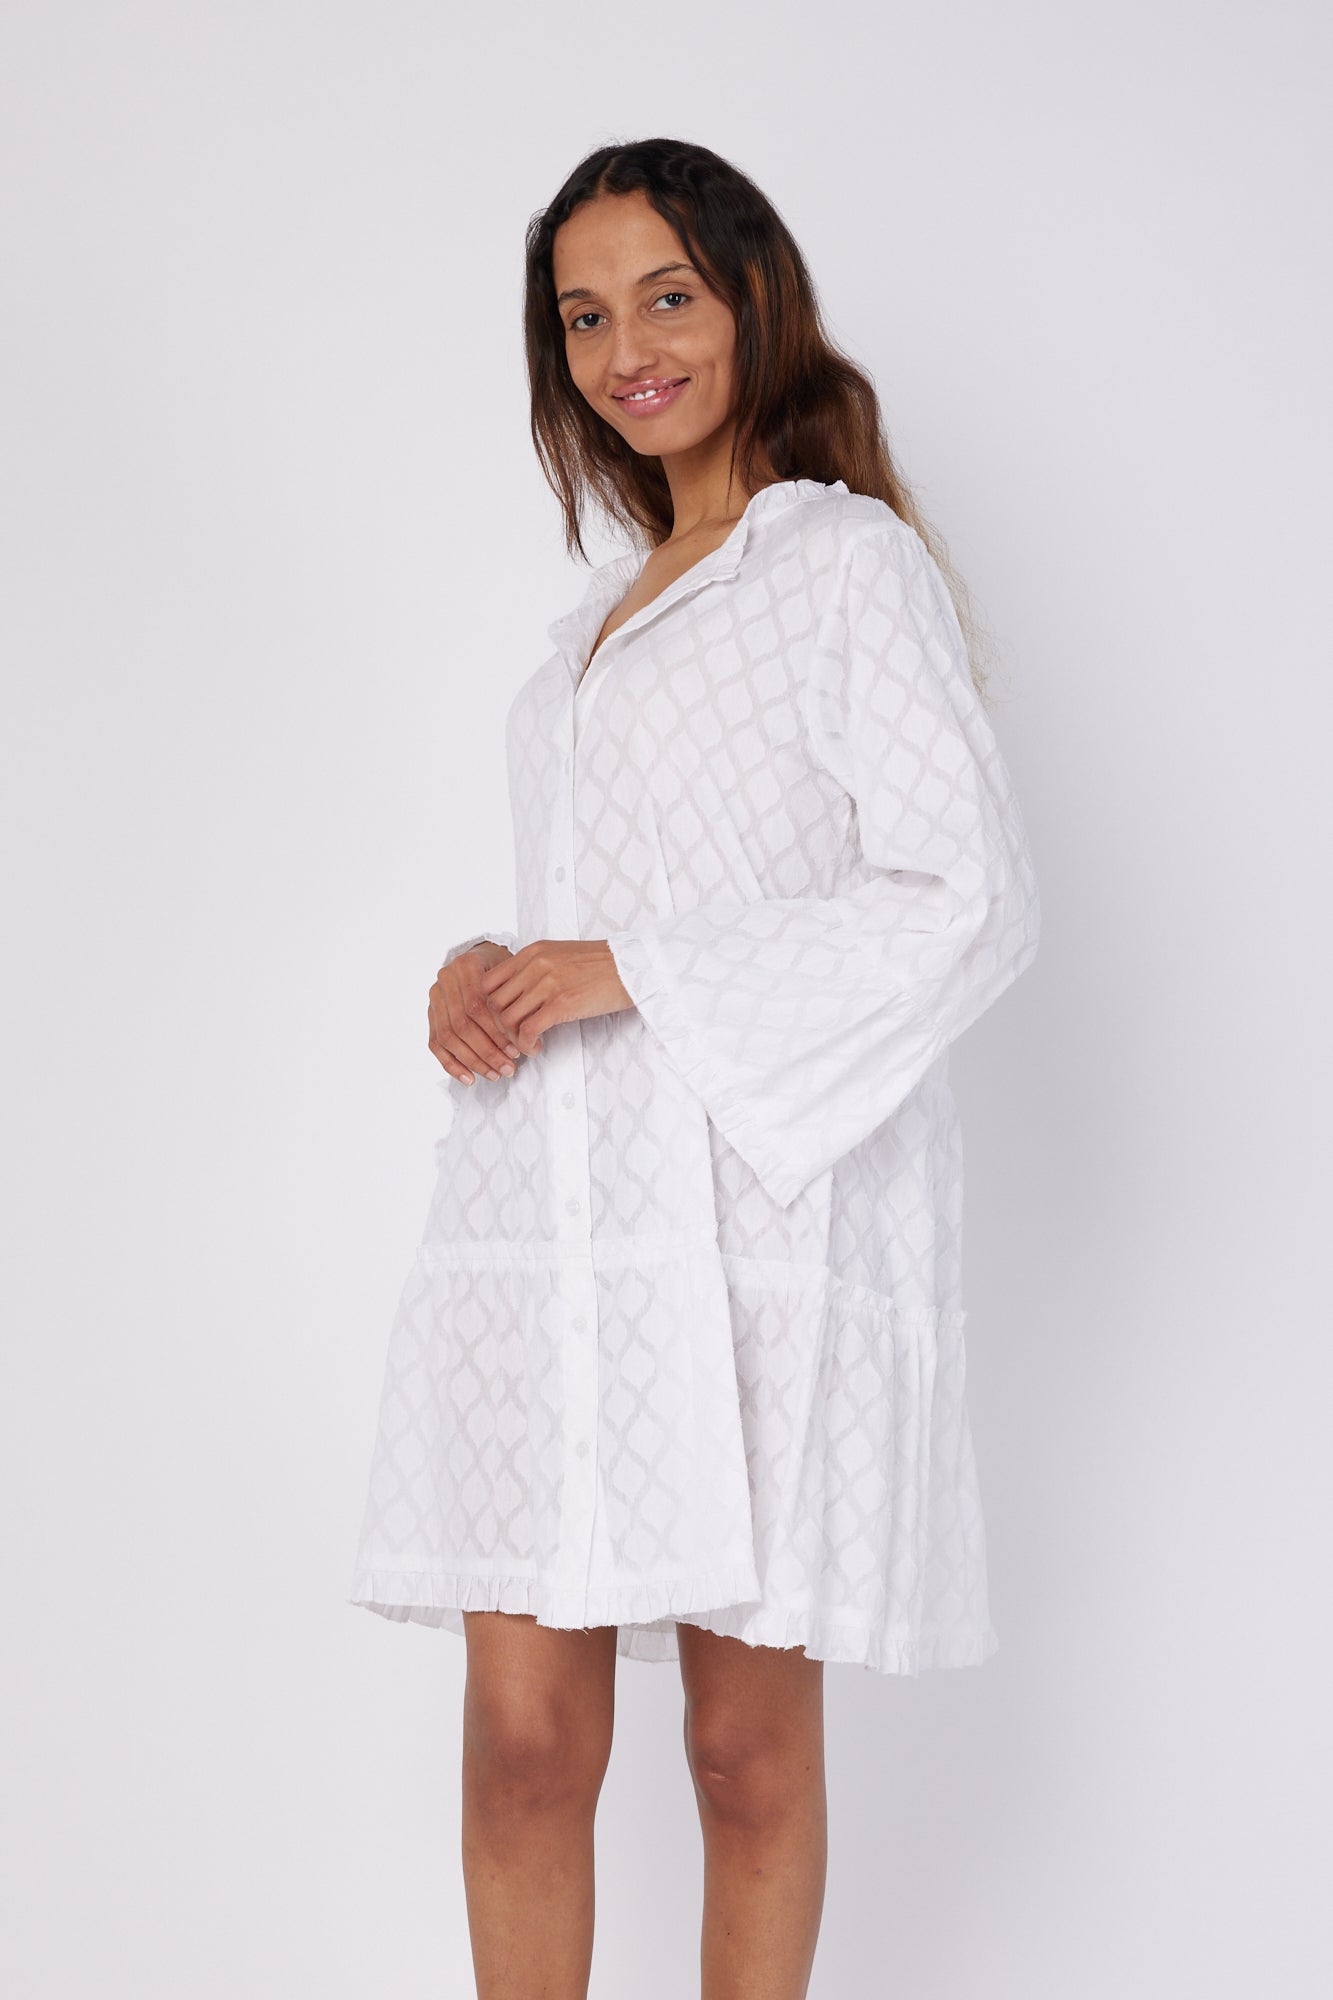 ModaPosa Alcee 3/4 Frill Sleeve Ruffle Knee Length Relaxed Jacquard Beach Dress in White . Discover women's resort dresses and lifestyle clothing inspired by the Mediterranean. Free worldwide shipping available!